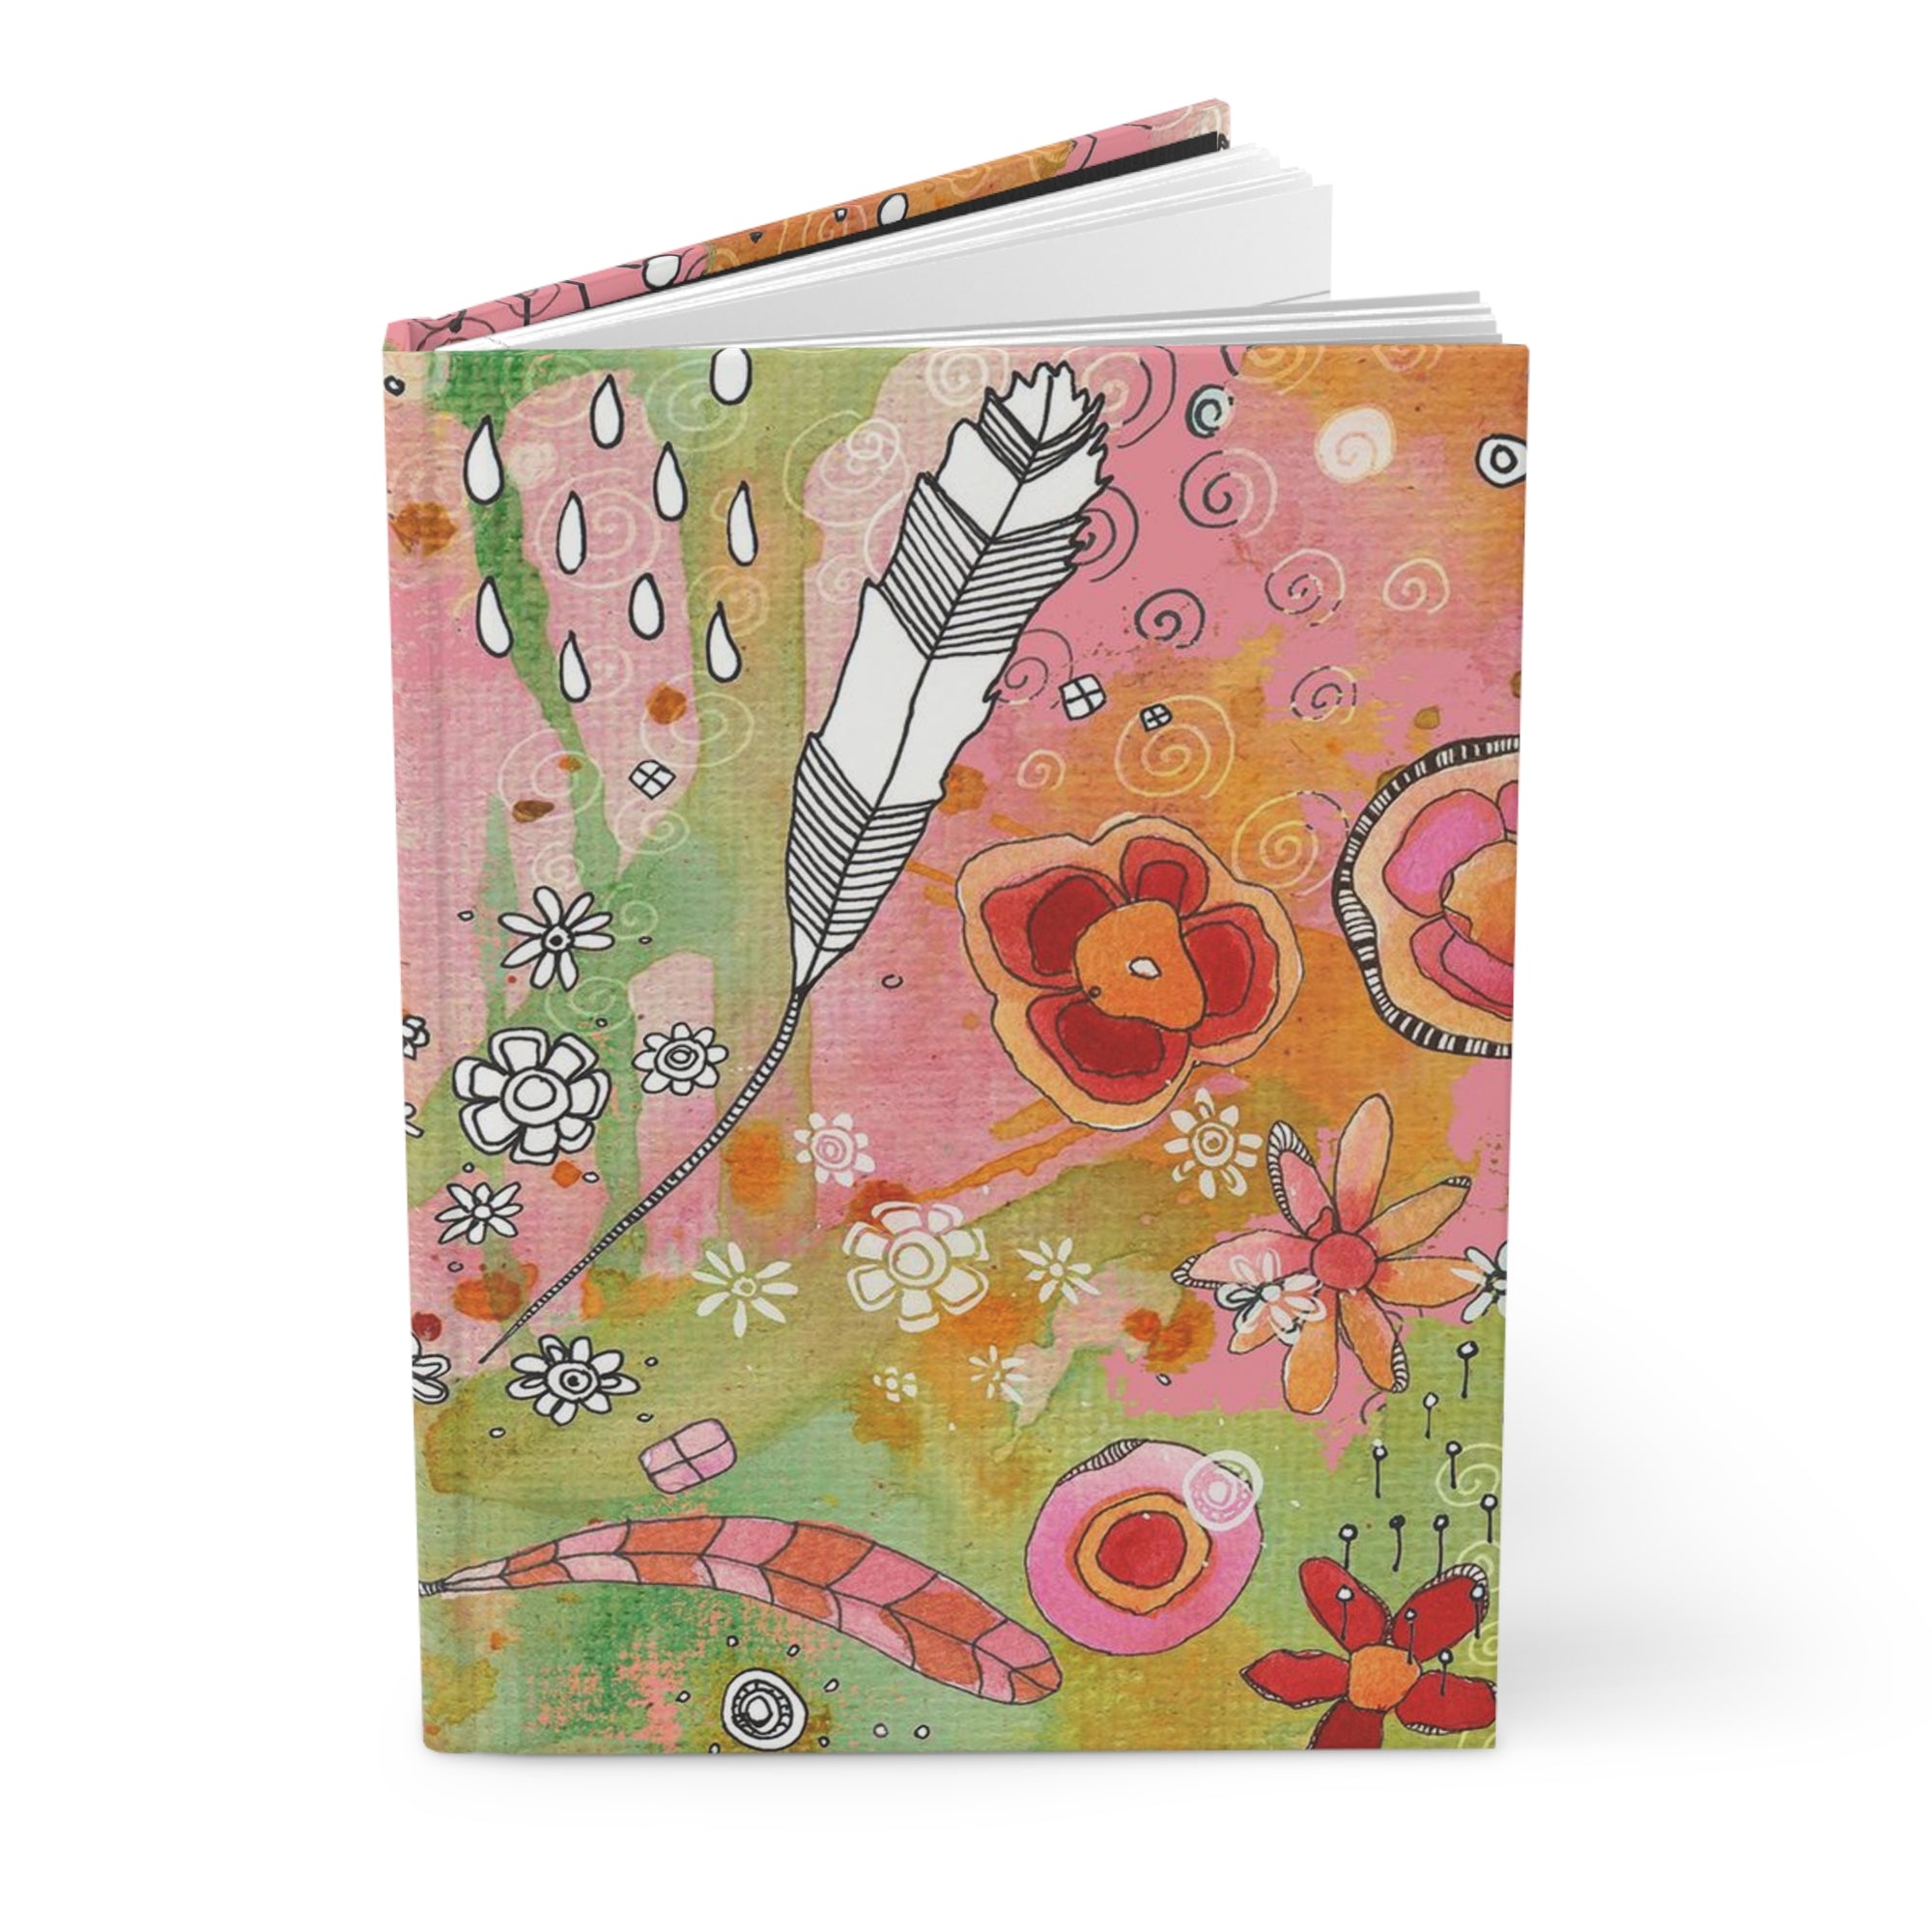 Boho Pink Floral Feathers Hardcover Journal "Feathers Flowers Showers"